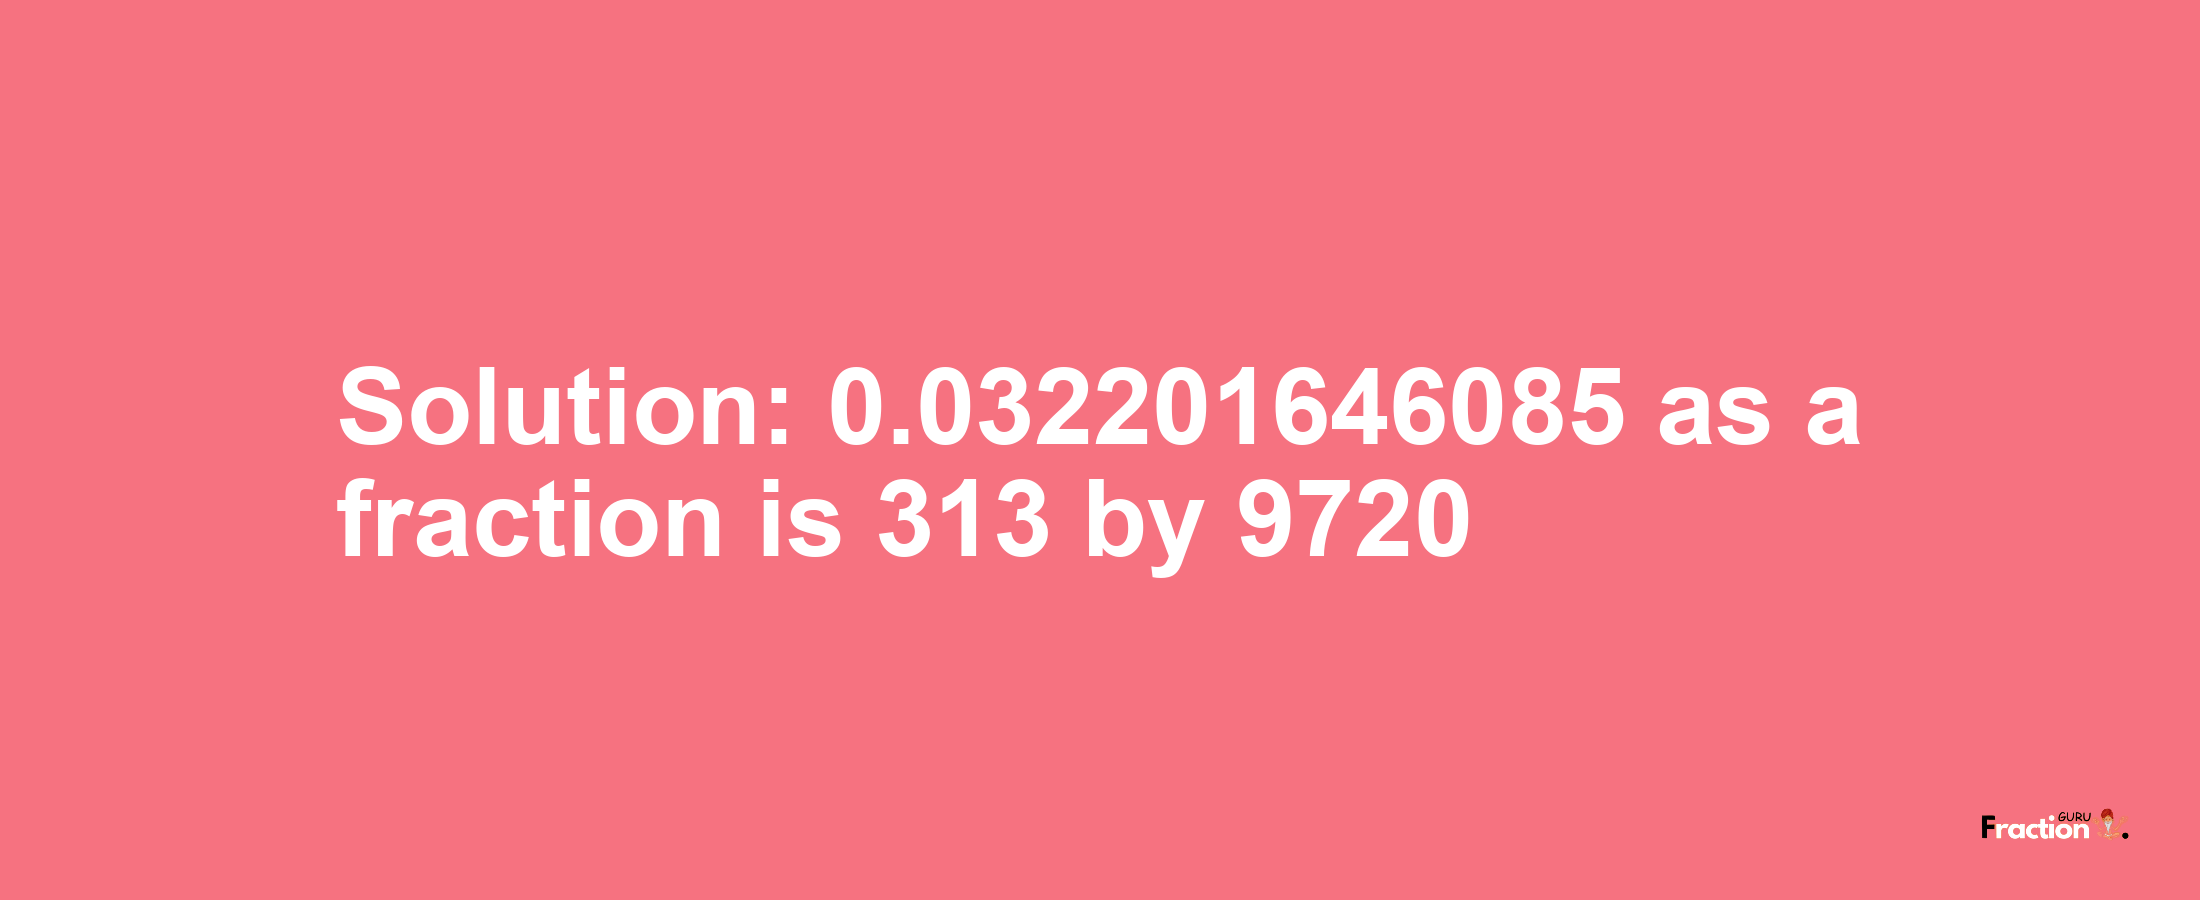 Solution:0.032201646085 as a fraction is 313/9720